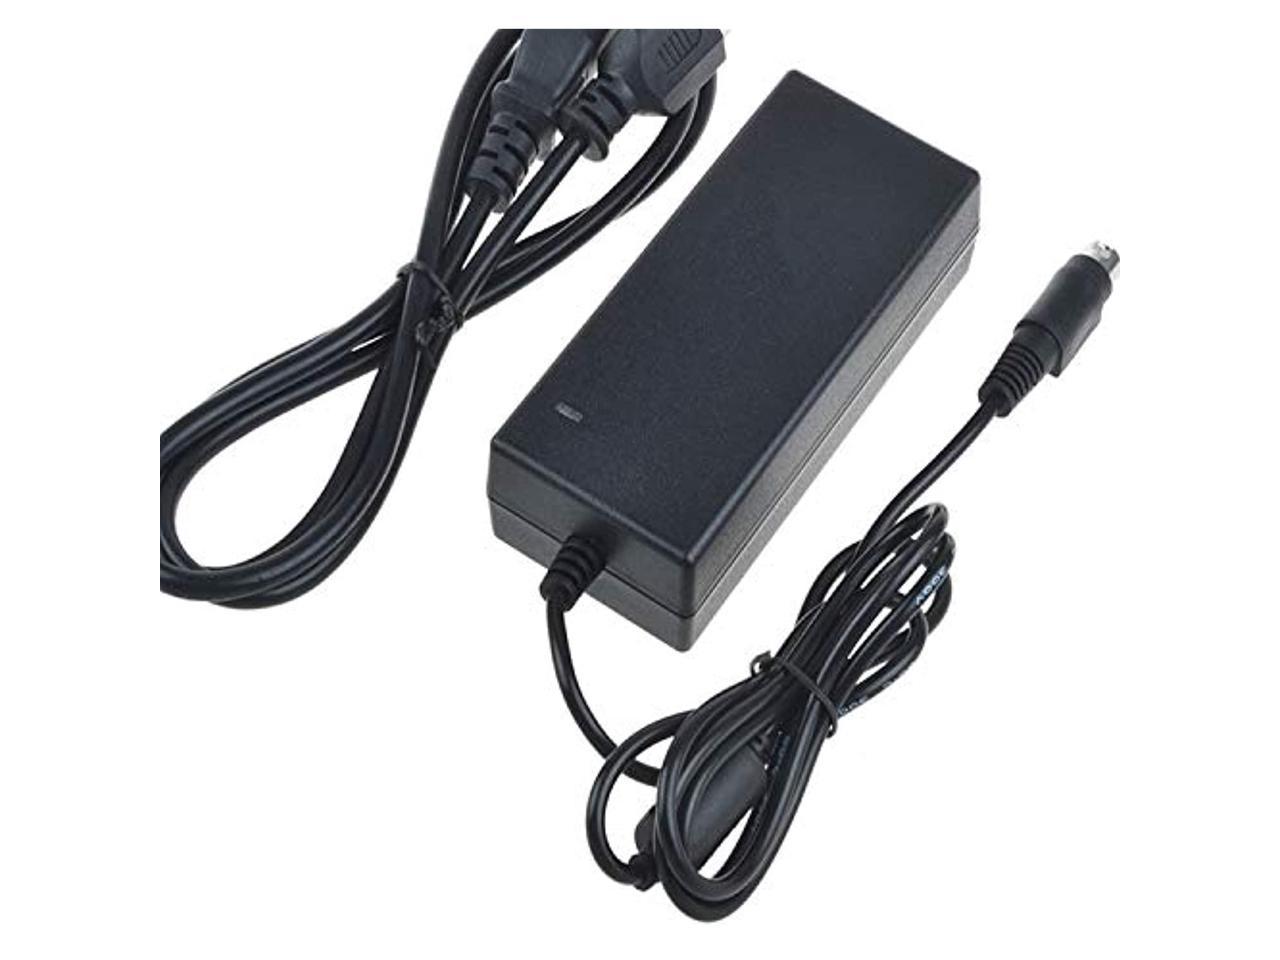 12V 5A AC-DC Adapter Charger for Data model SPV-1250 1250 Power Supply Cord PSU Features Portable Manufacturer Warranty